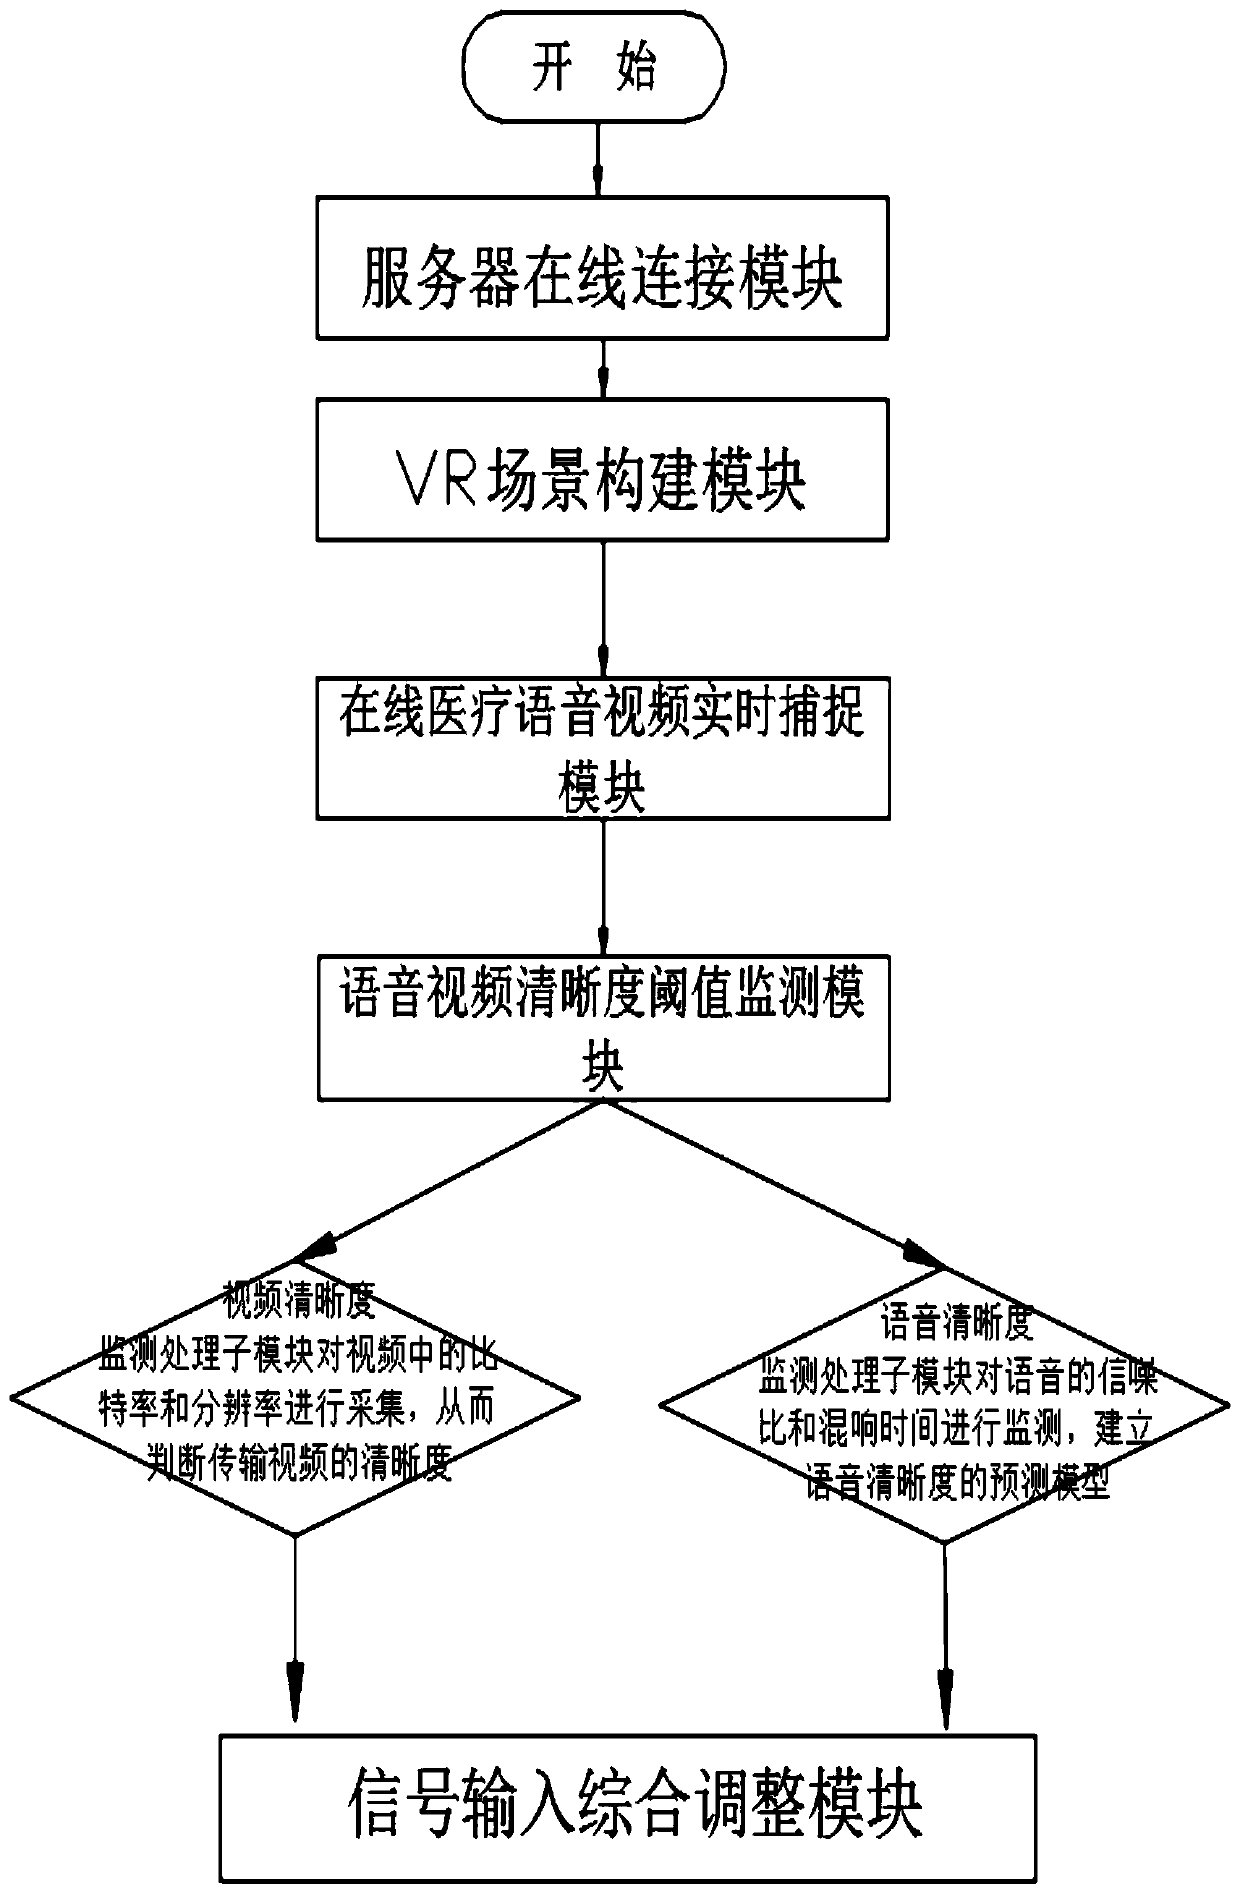 Voice and video definition adjusting system and method based on a remote operation